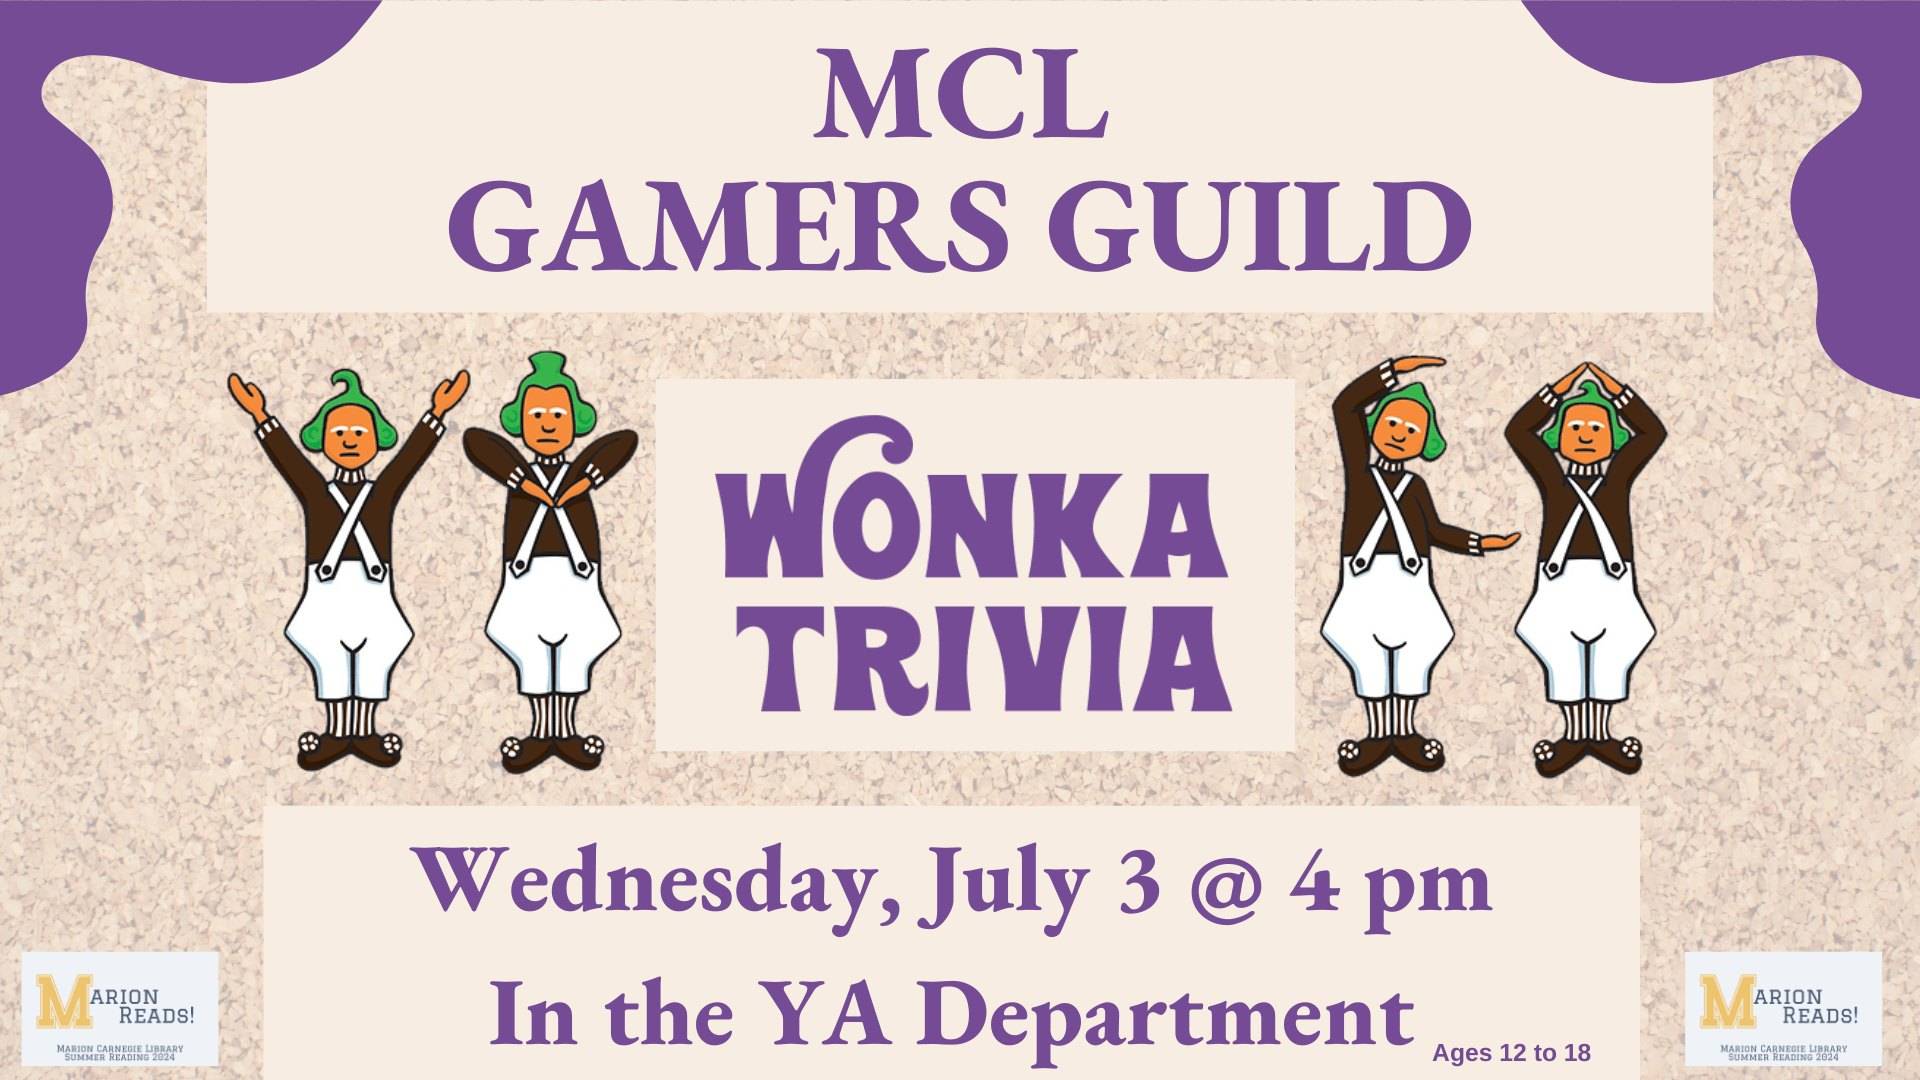 mcl-gamers-guild-marion-illinois-library-event